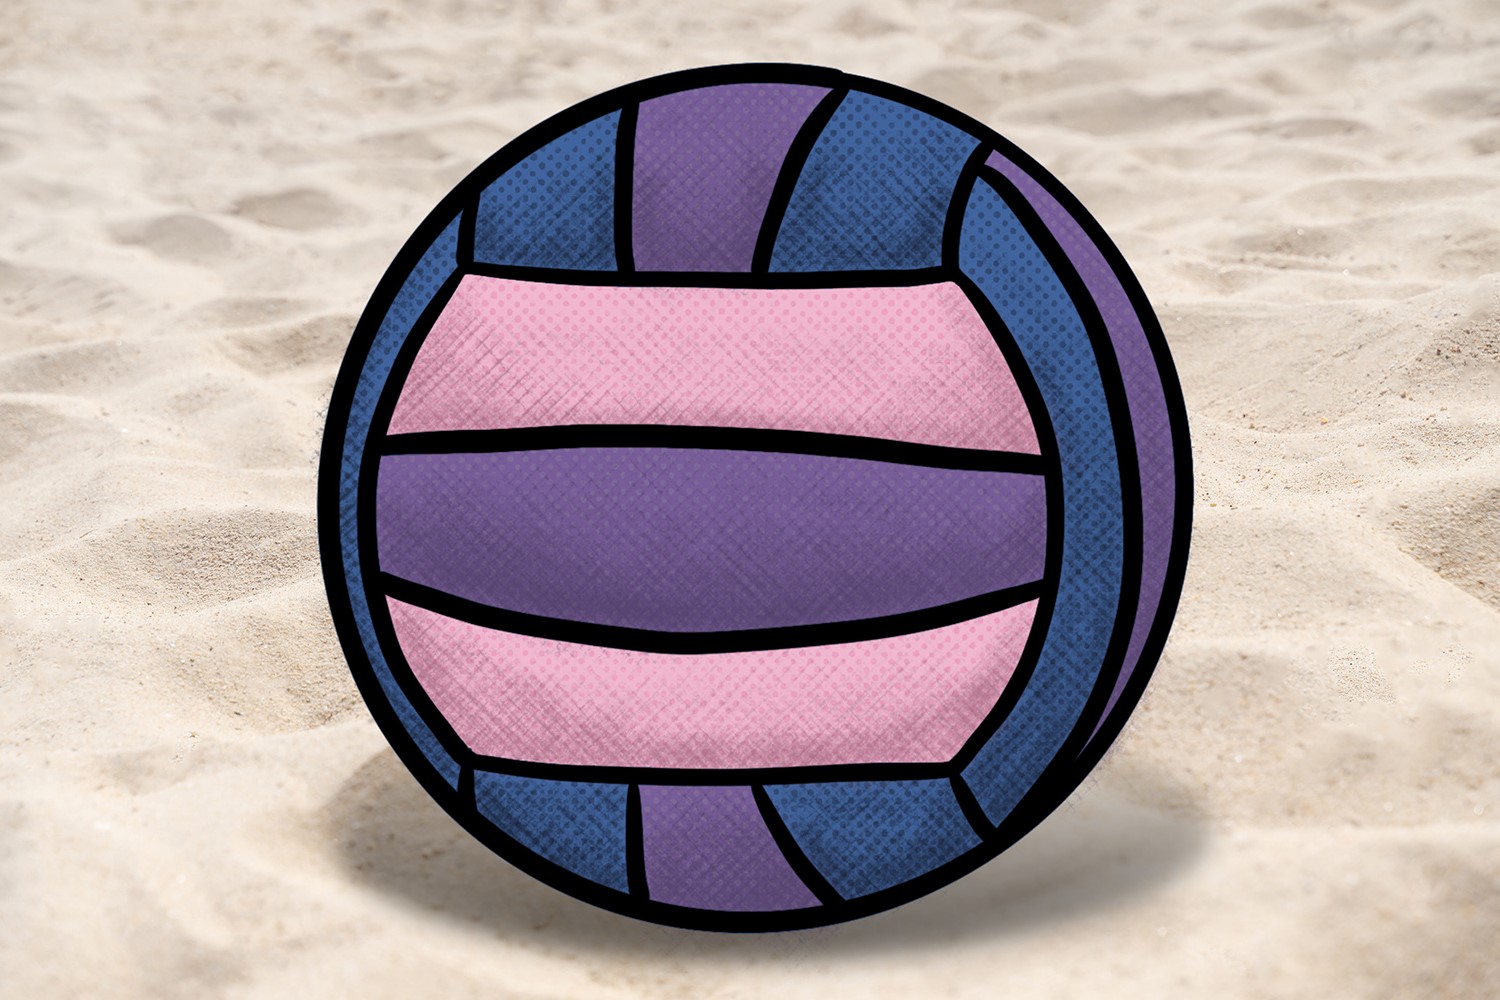 How To Draw A Volleyball